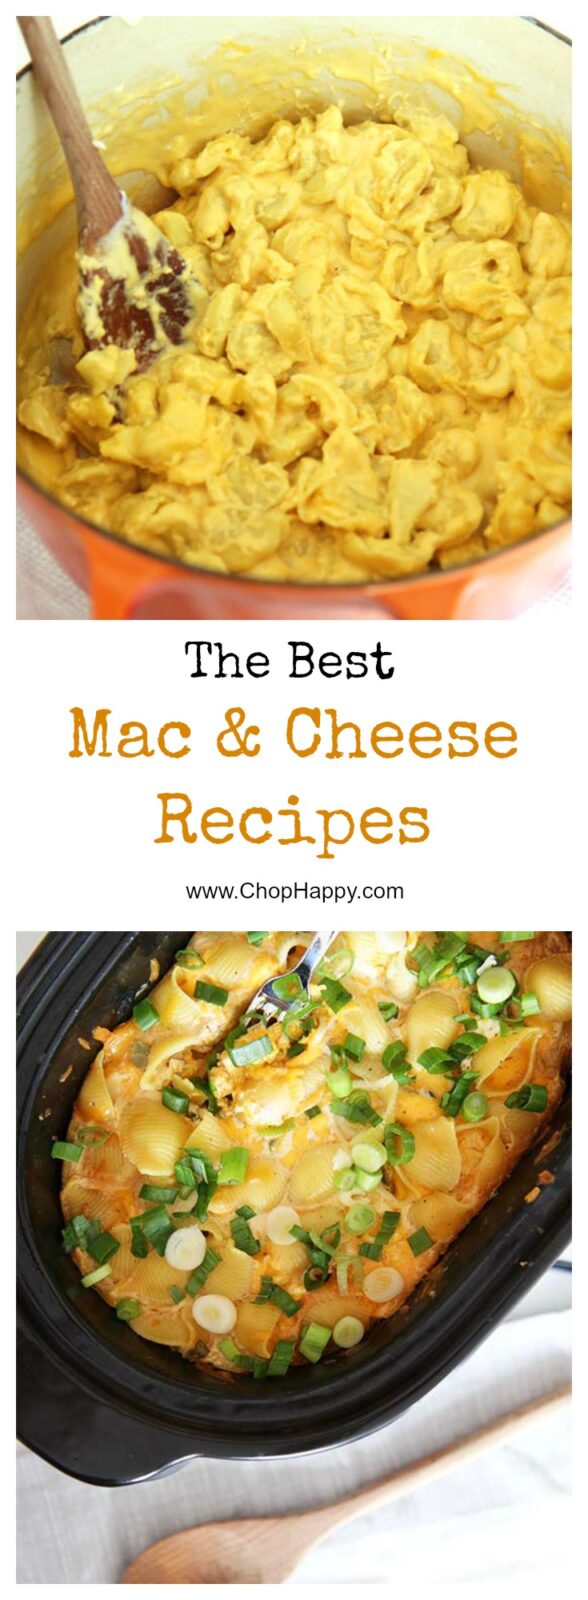 The Best Mac and Cheese Recipes - that are decadent comfort food fun. For this dinner recipe grab pasta, cheese, and fun veggies. Happy comfort food eating. www.ChopHappy.com